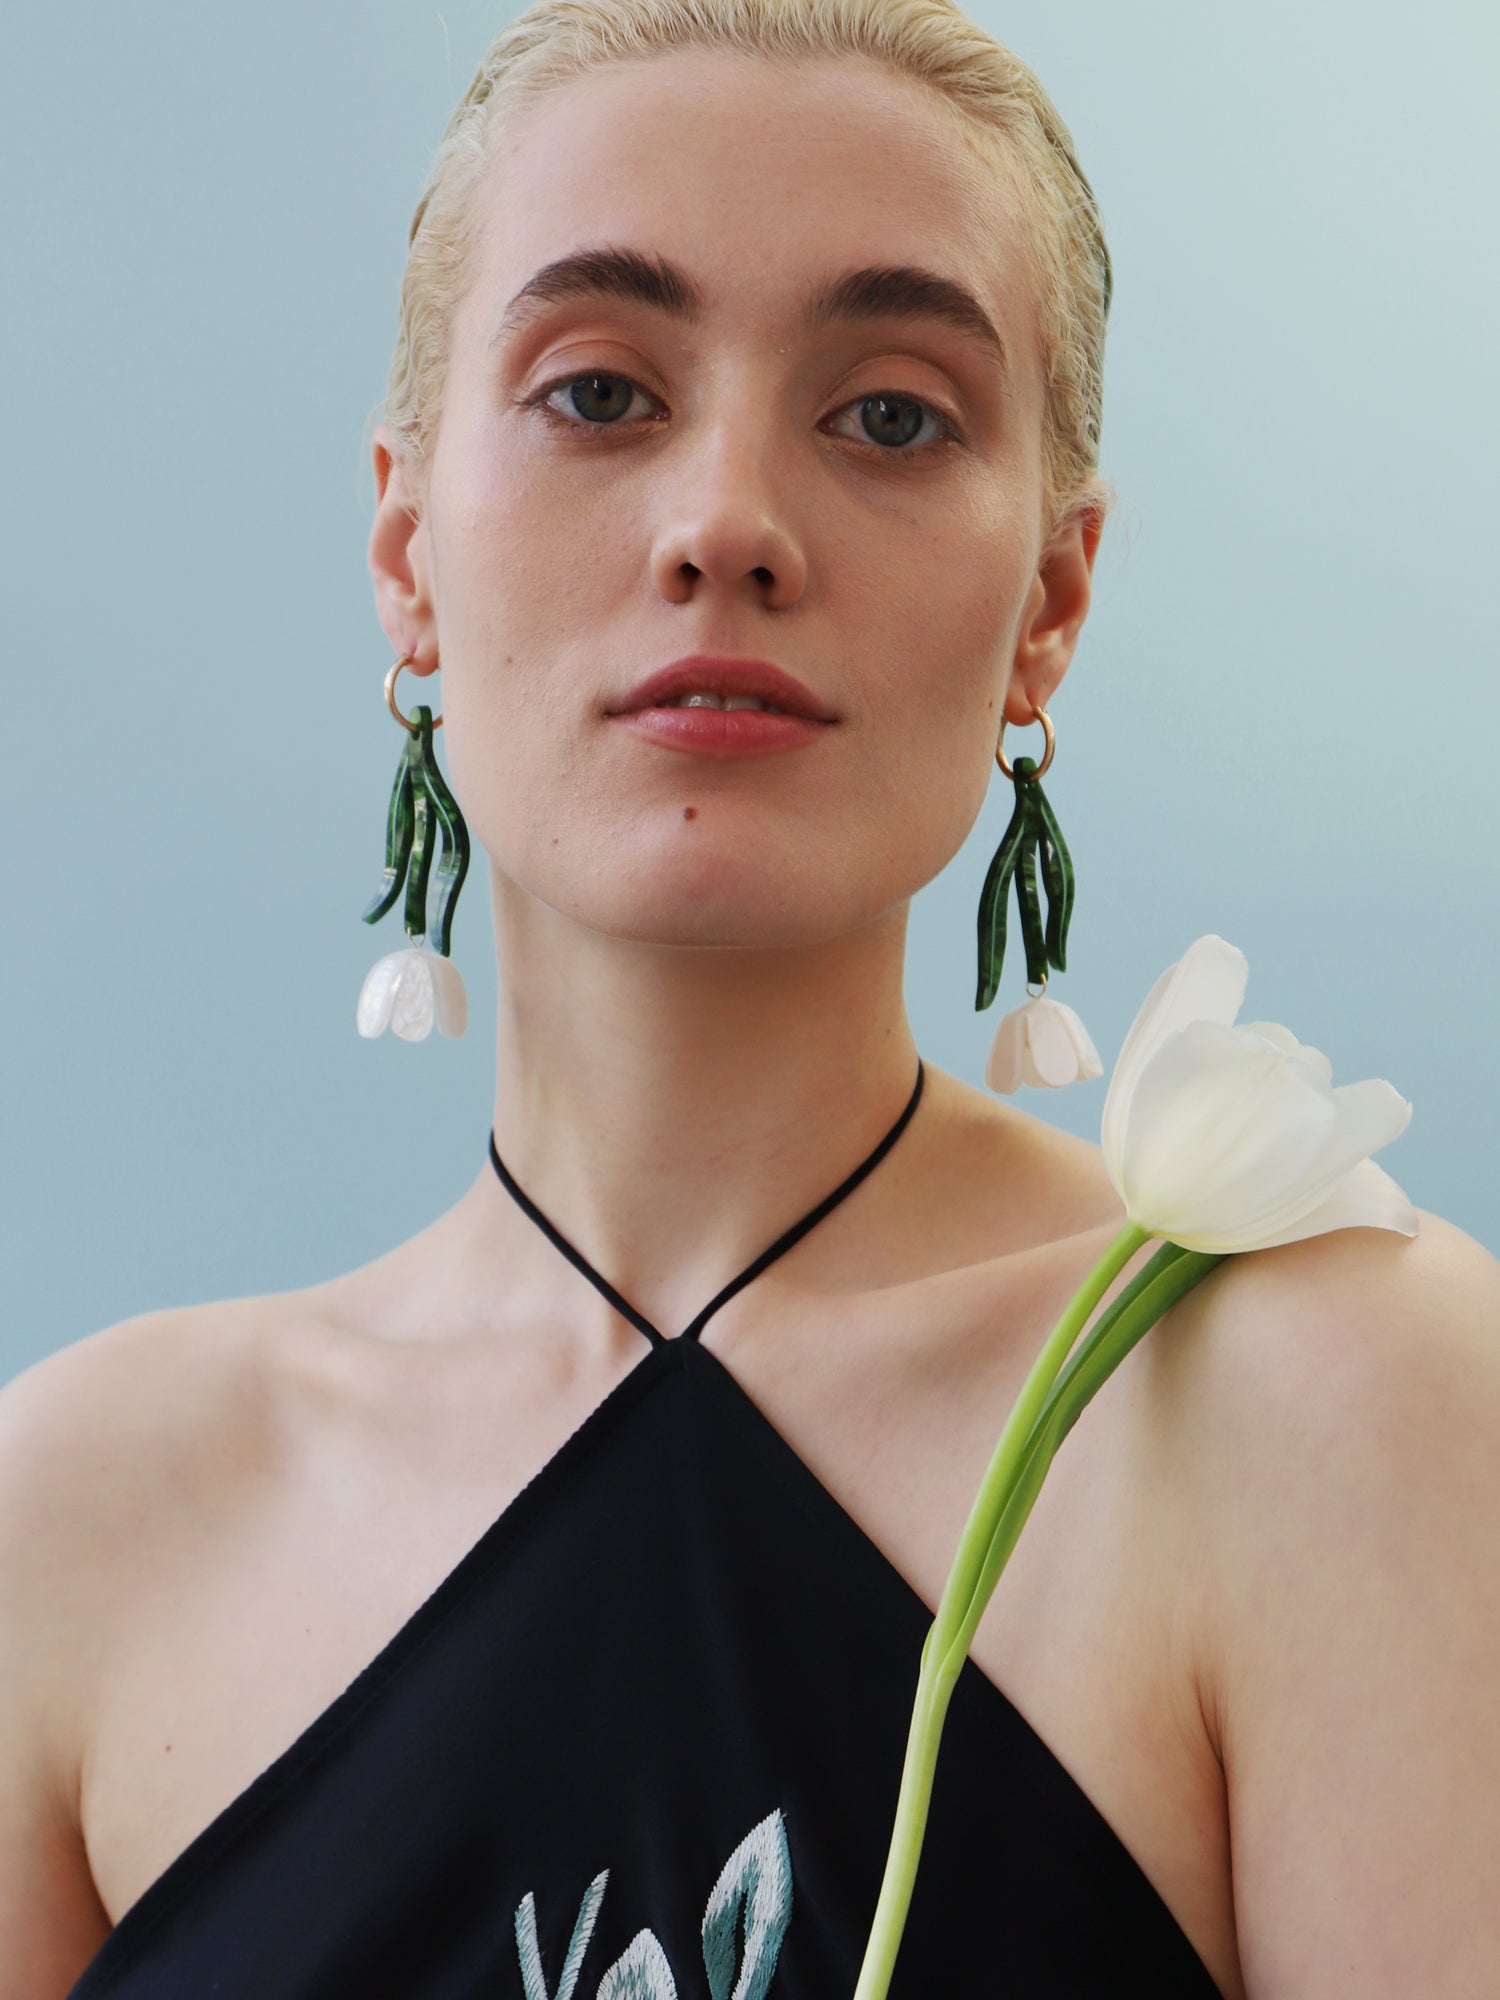 White & green sculptural tulip statement hoop earrings. Made from heat-formed acrylic with high quality glass pearls and 14k gold-filled findings. Handmade in the UK by Wolf & Moon.